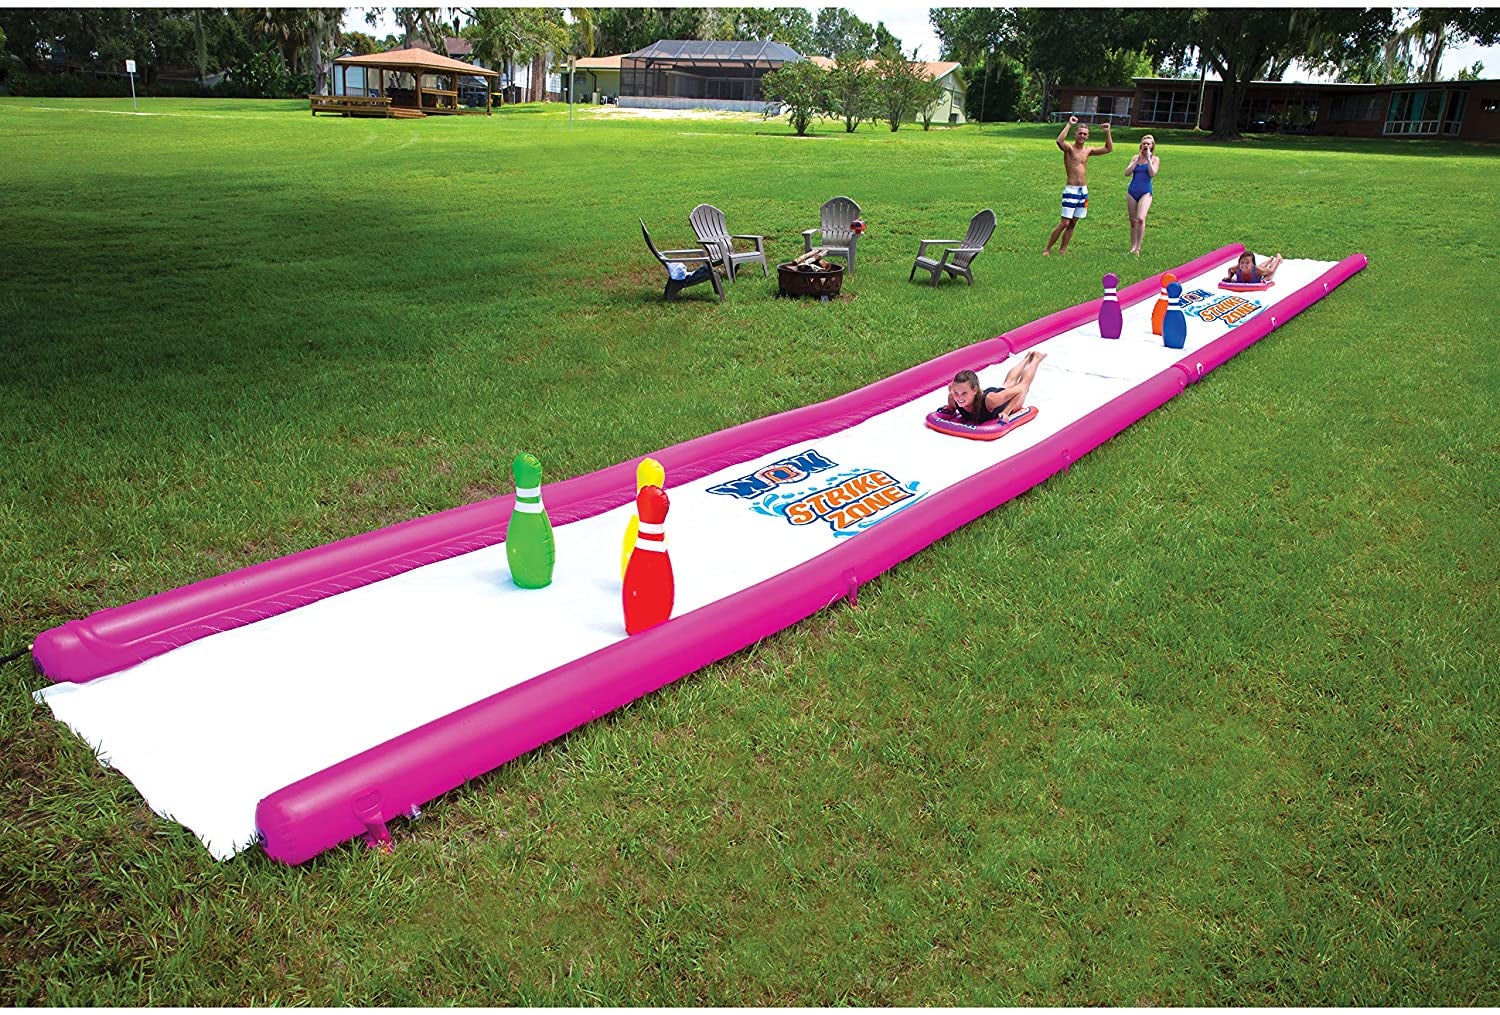 two models using the white and pink slip n' slide which has bowling pins at the end